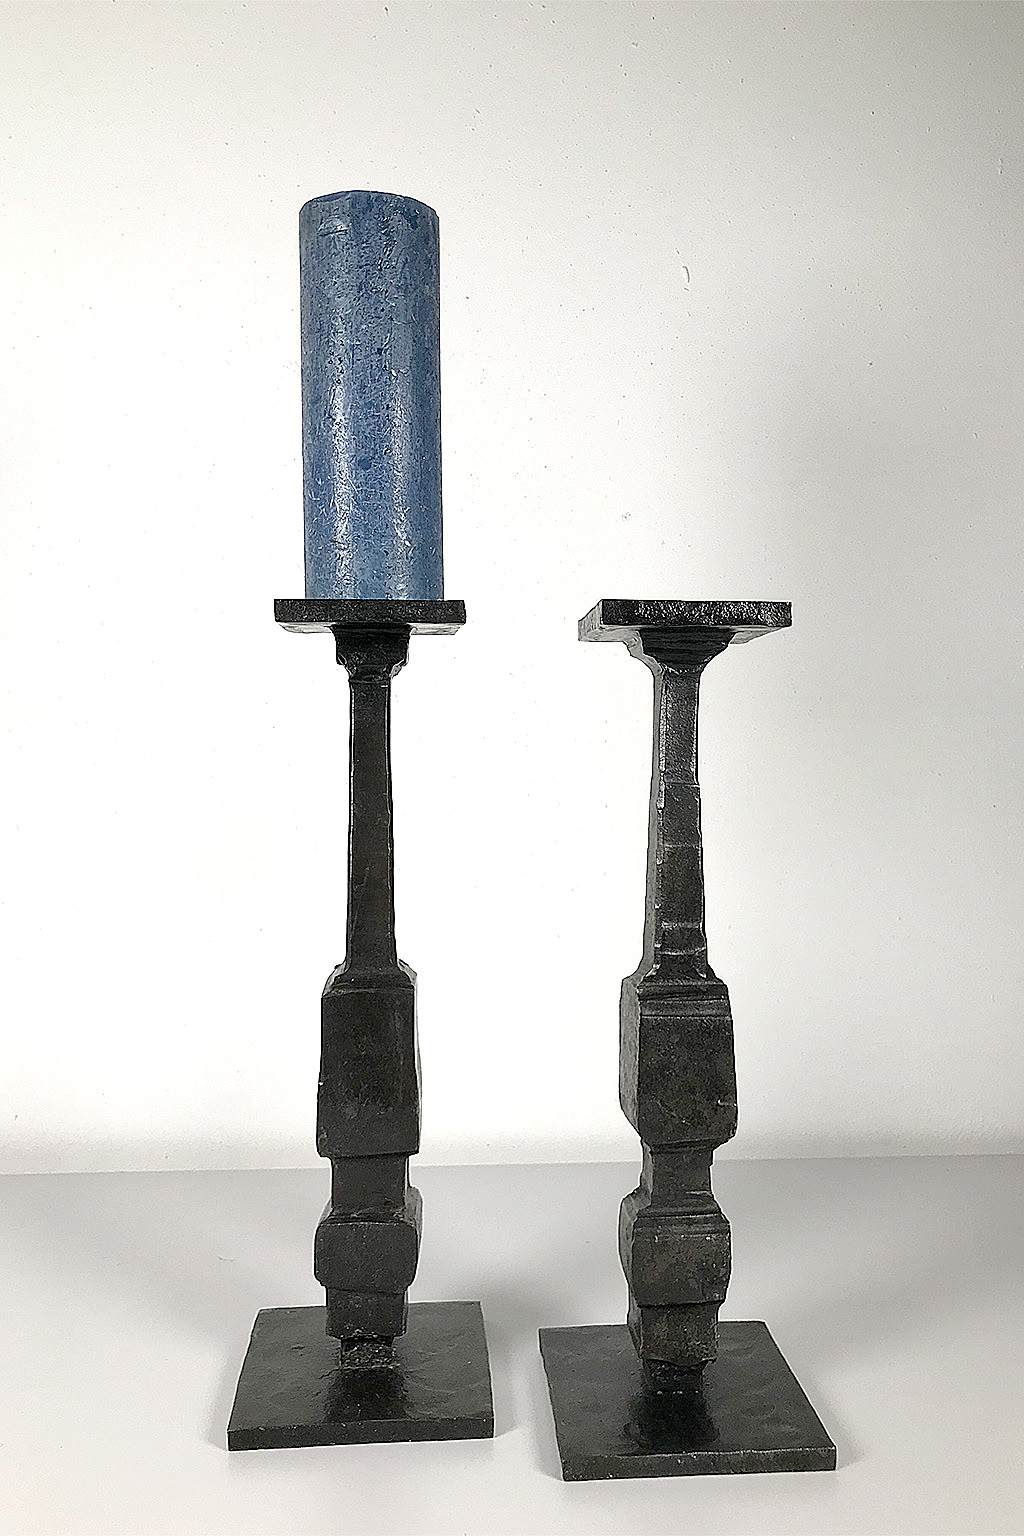 Brutalistic candle holders